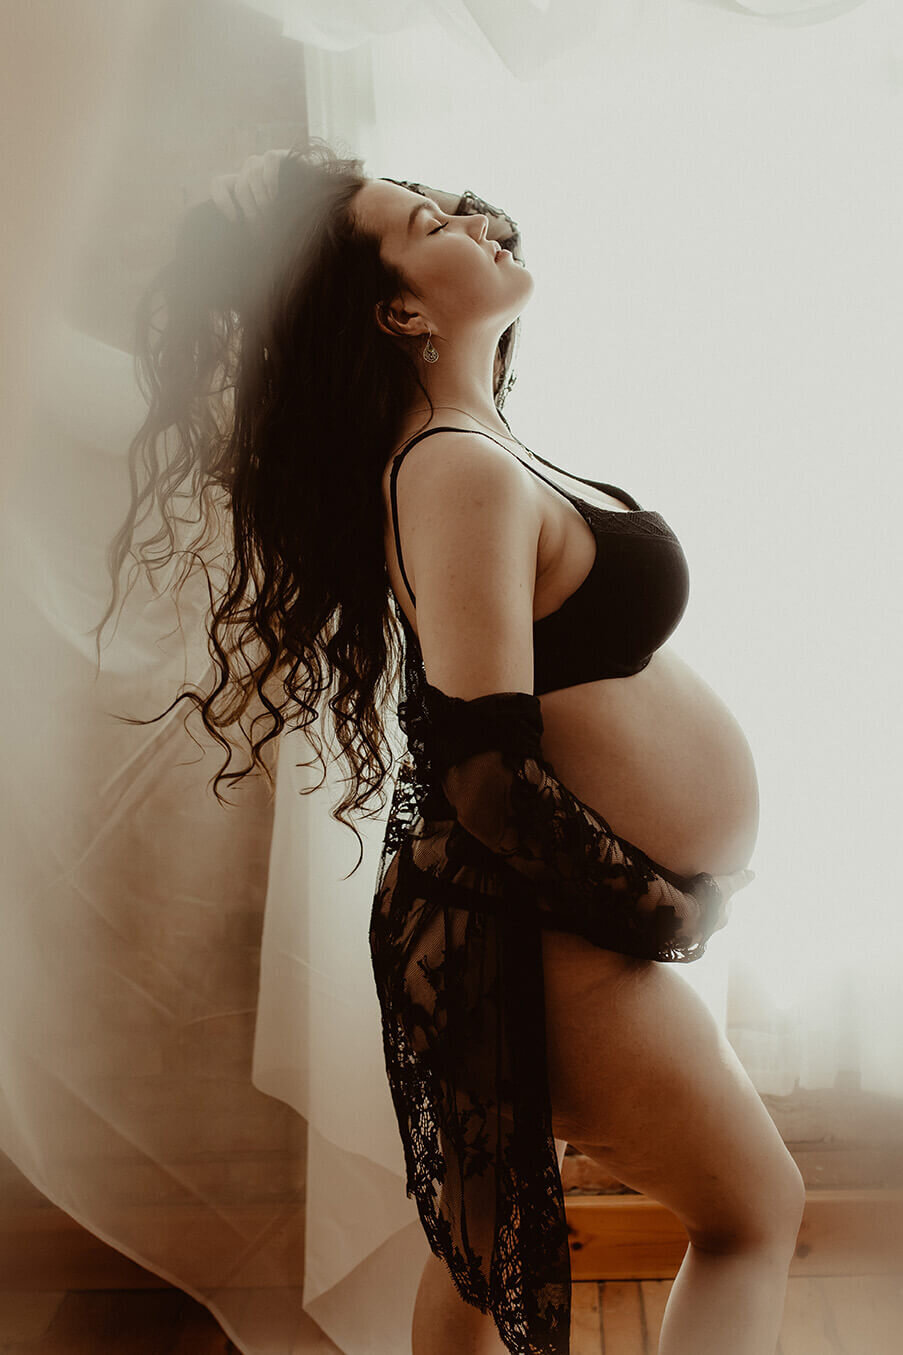 A beautiful pregnant woman wearing a black bra and panty set with a black robe standing in front of a window fixing her hair